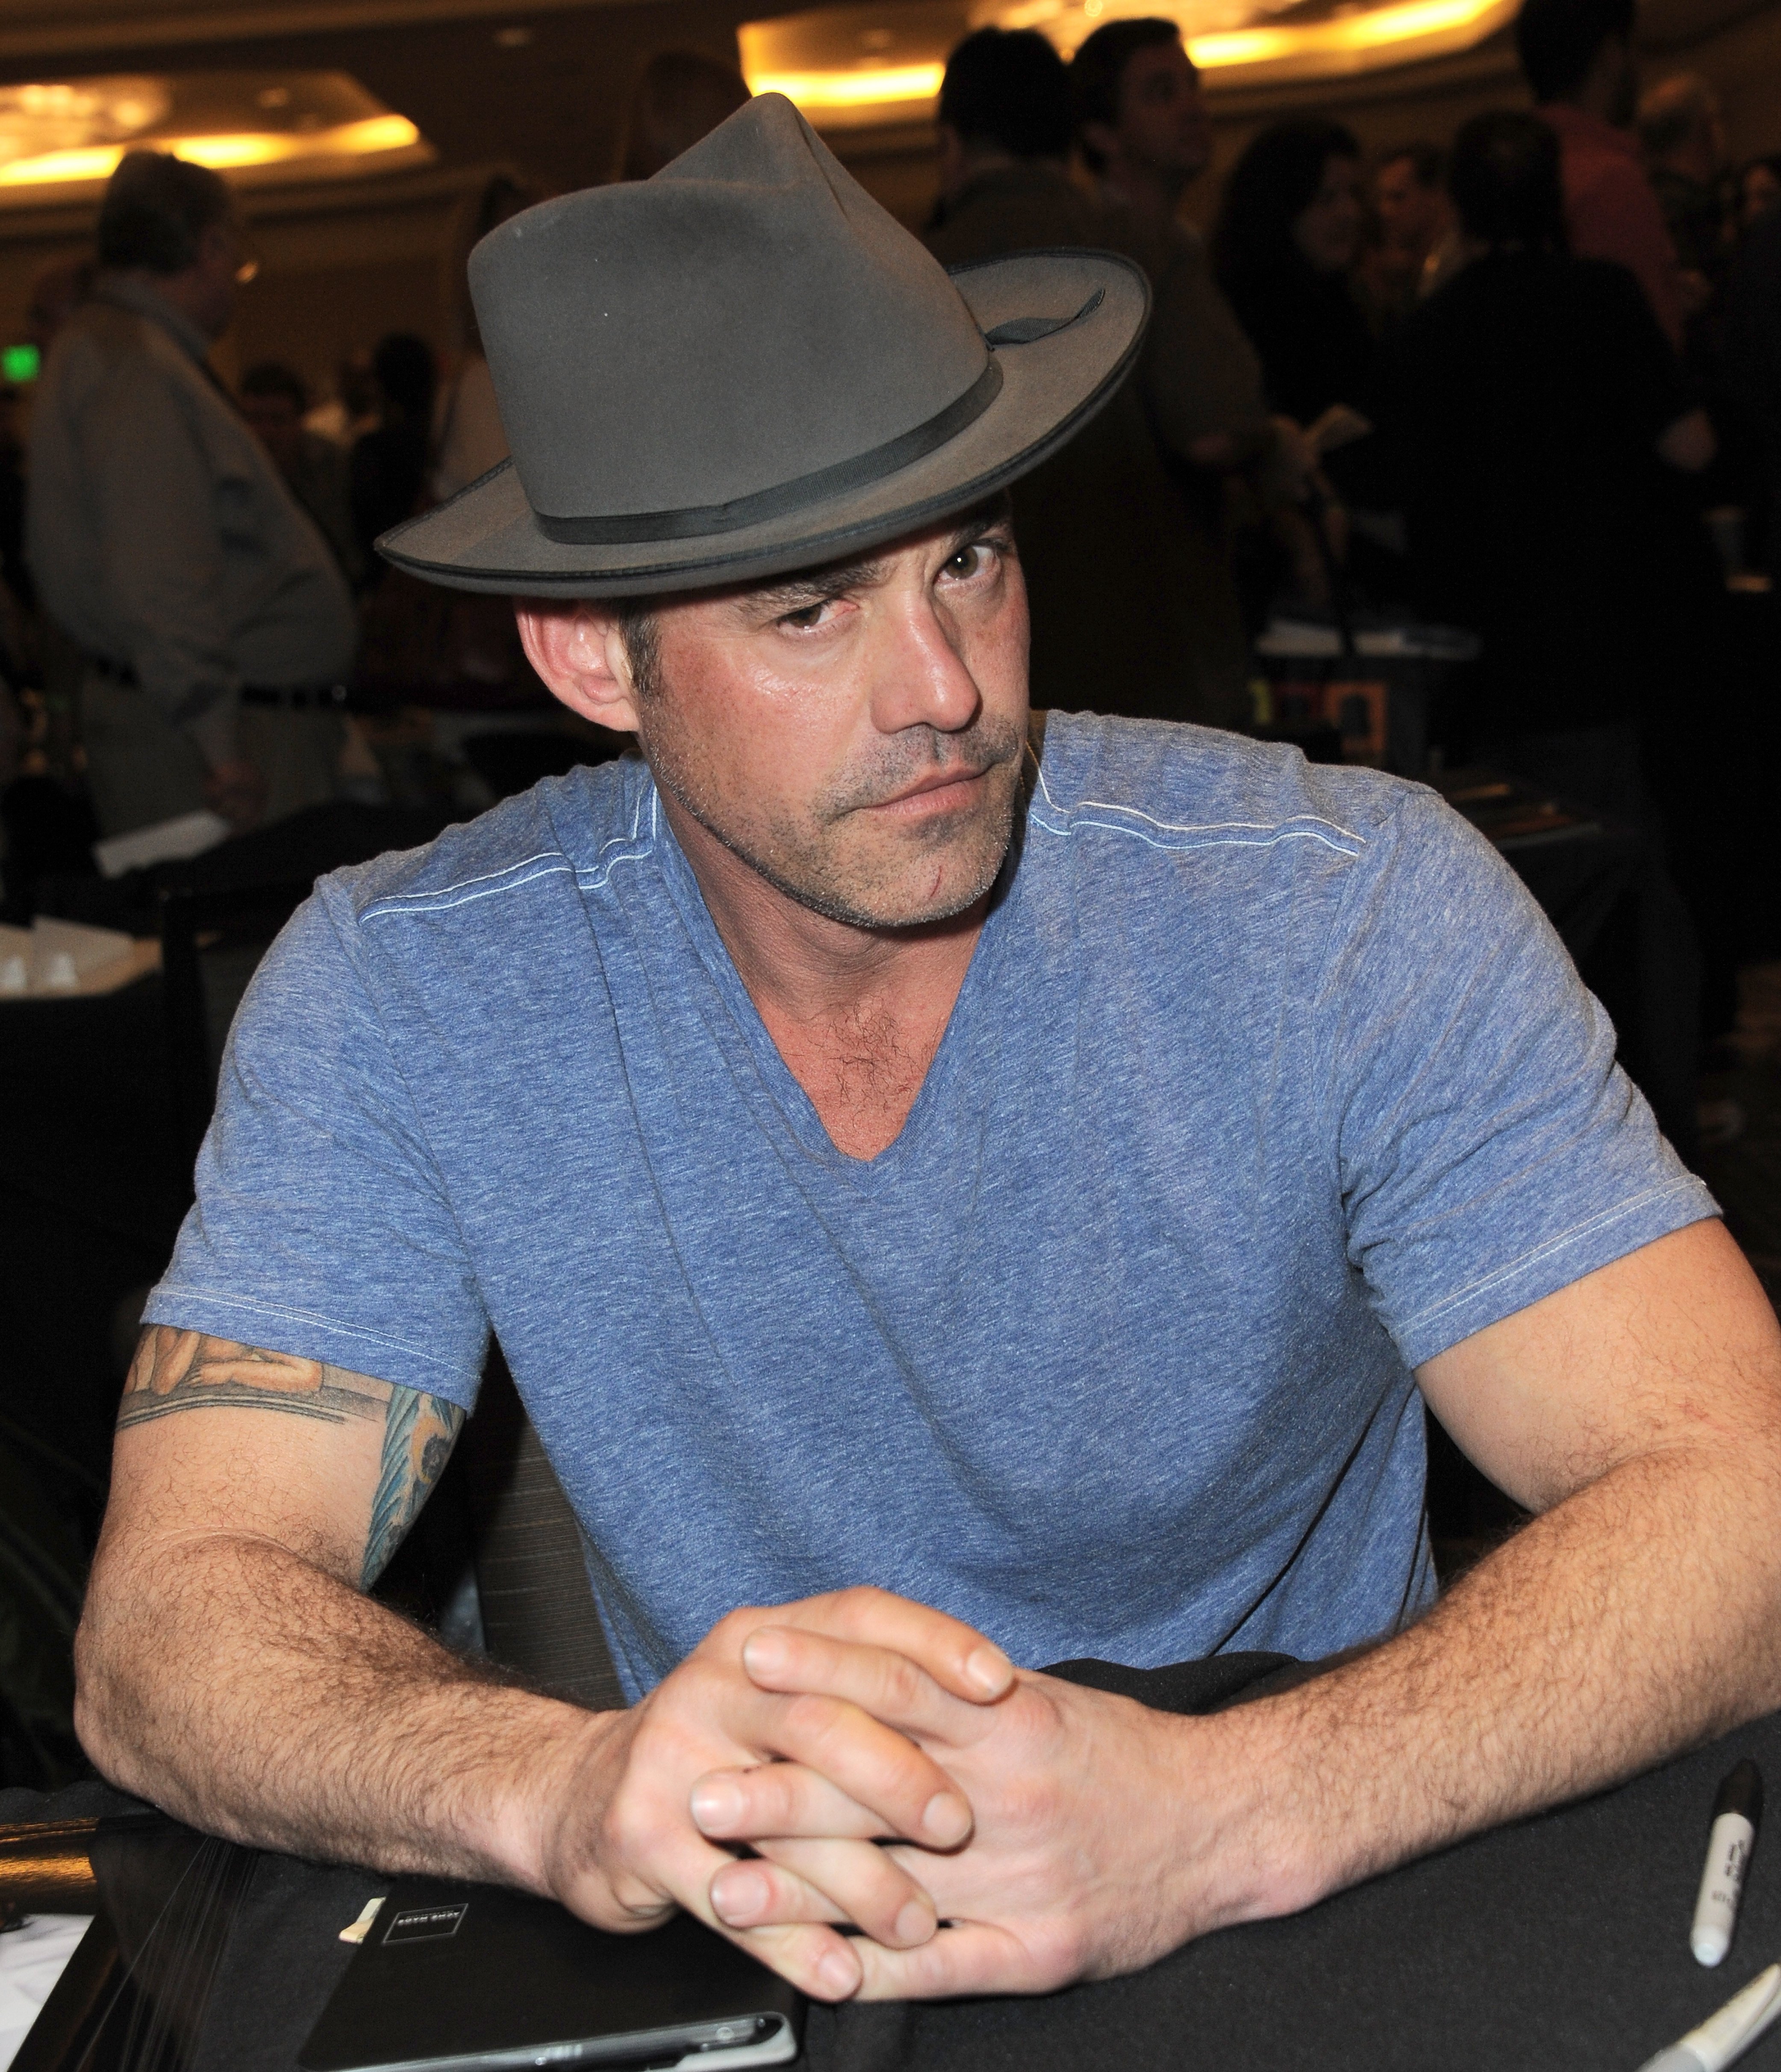 Nicholas Brendon attends The Hollywood Show in Los Angeles, California on January 24, 2015 | Photo: Getty Images